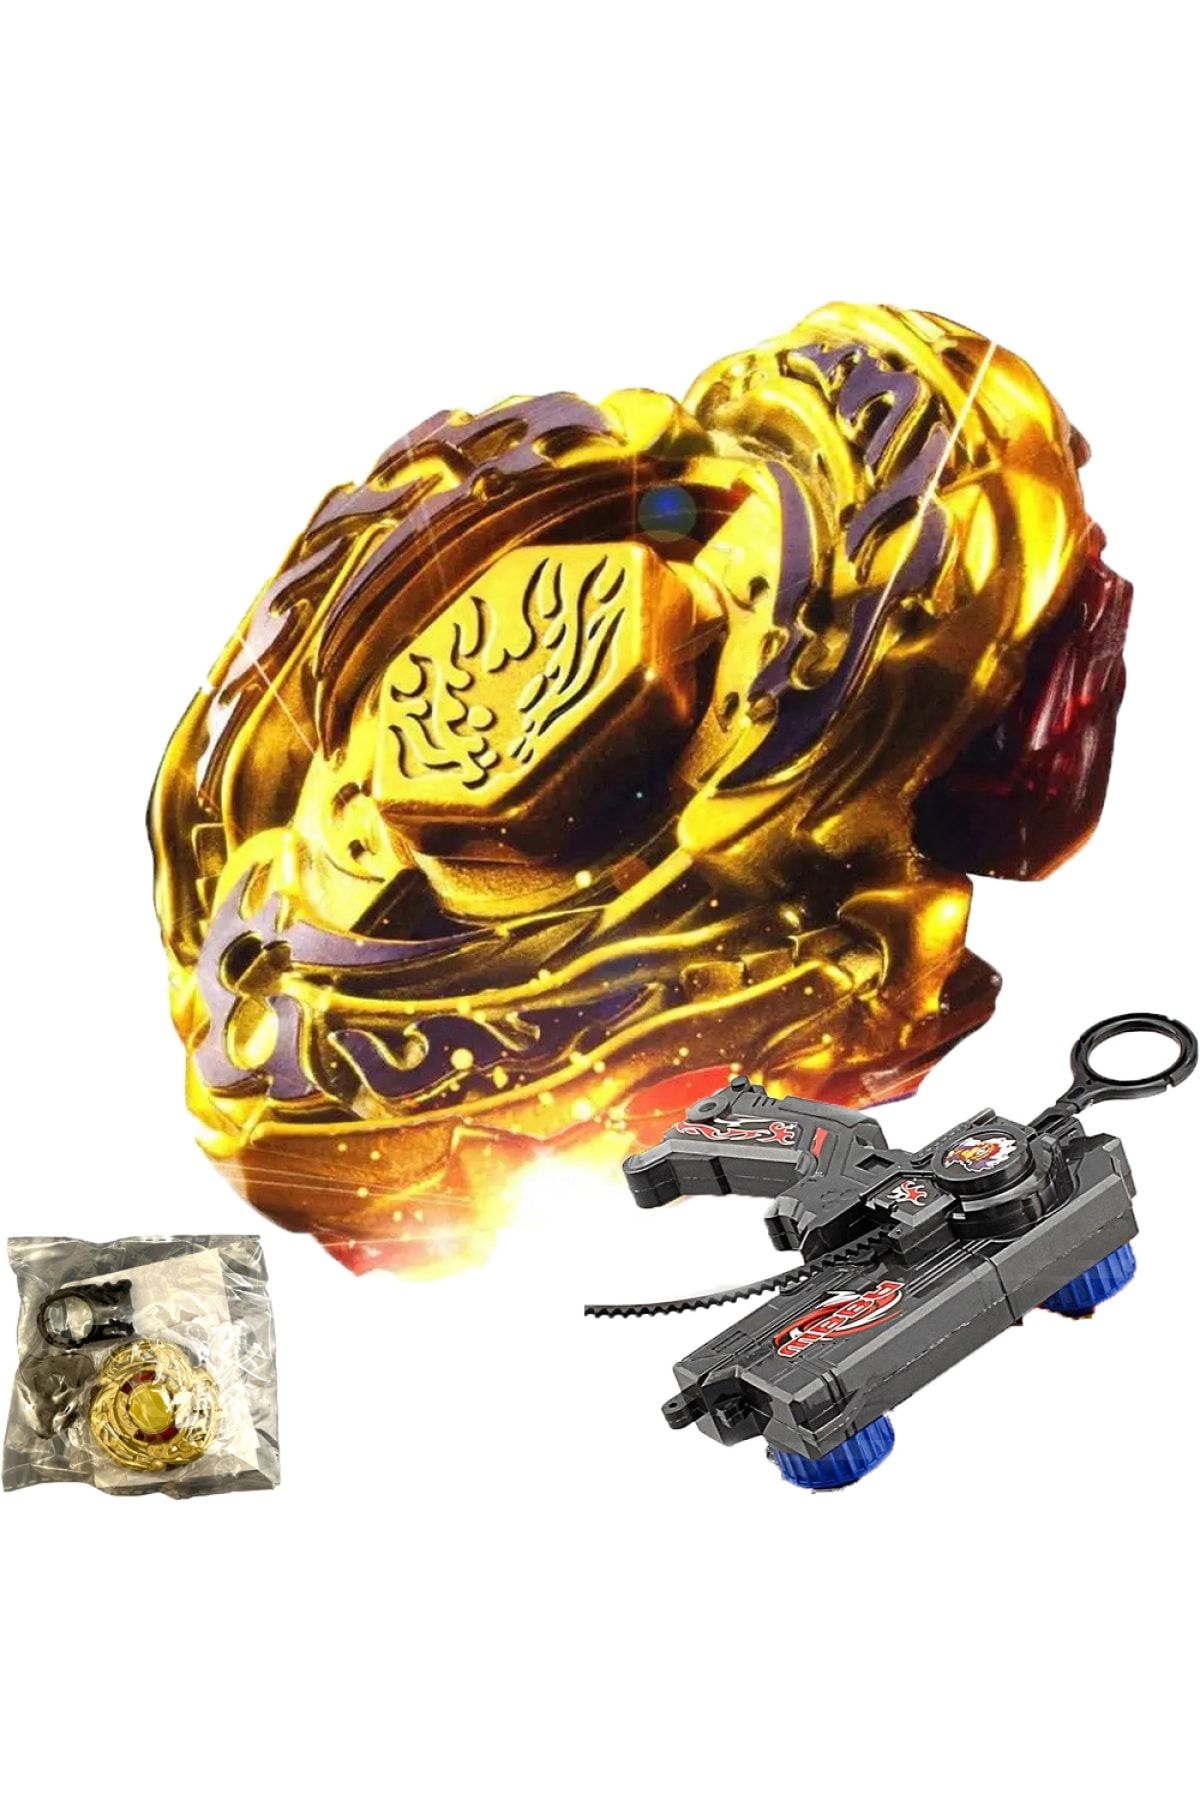 Beyblade Rapidity L-drago Gold Metal Fusion Df105lrf 4d System - Bb1gold1584s